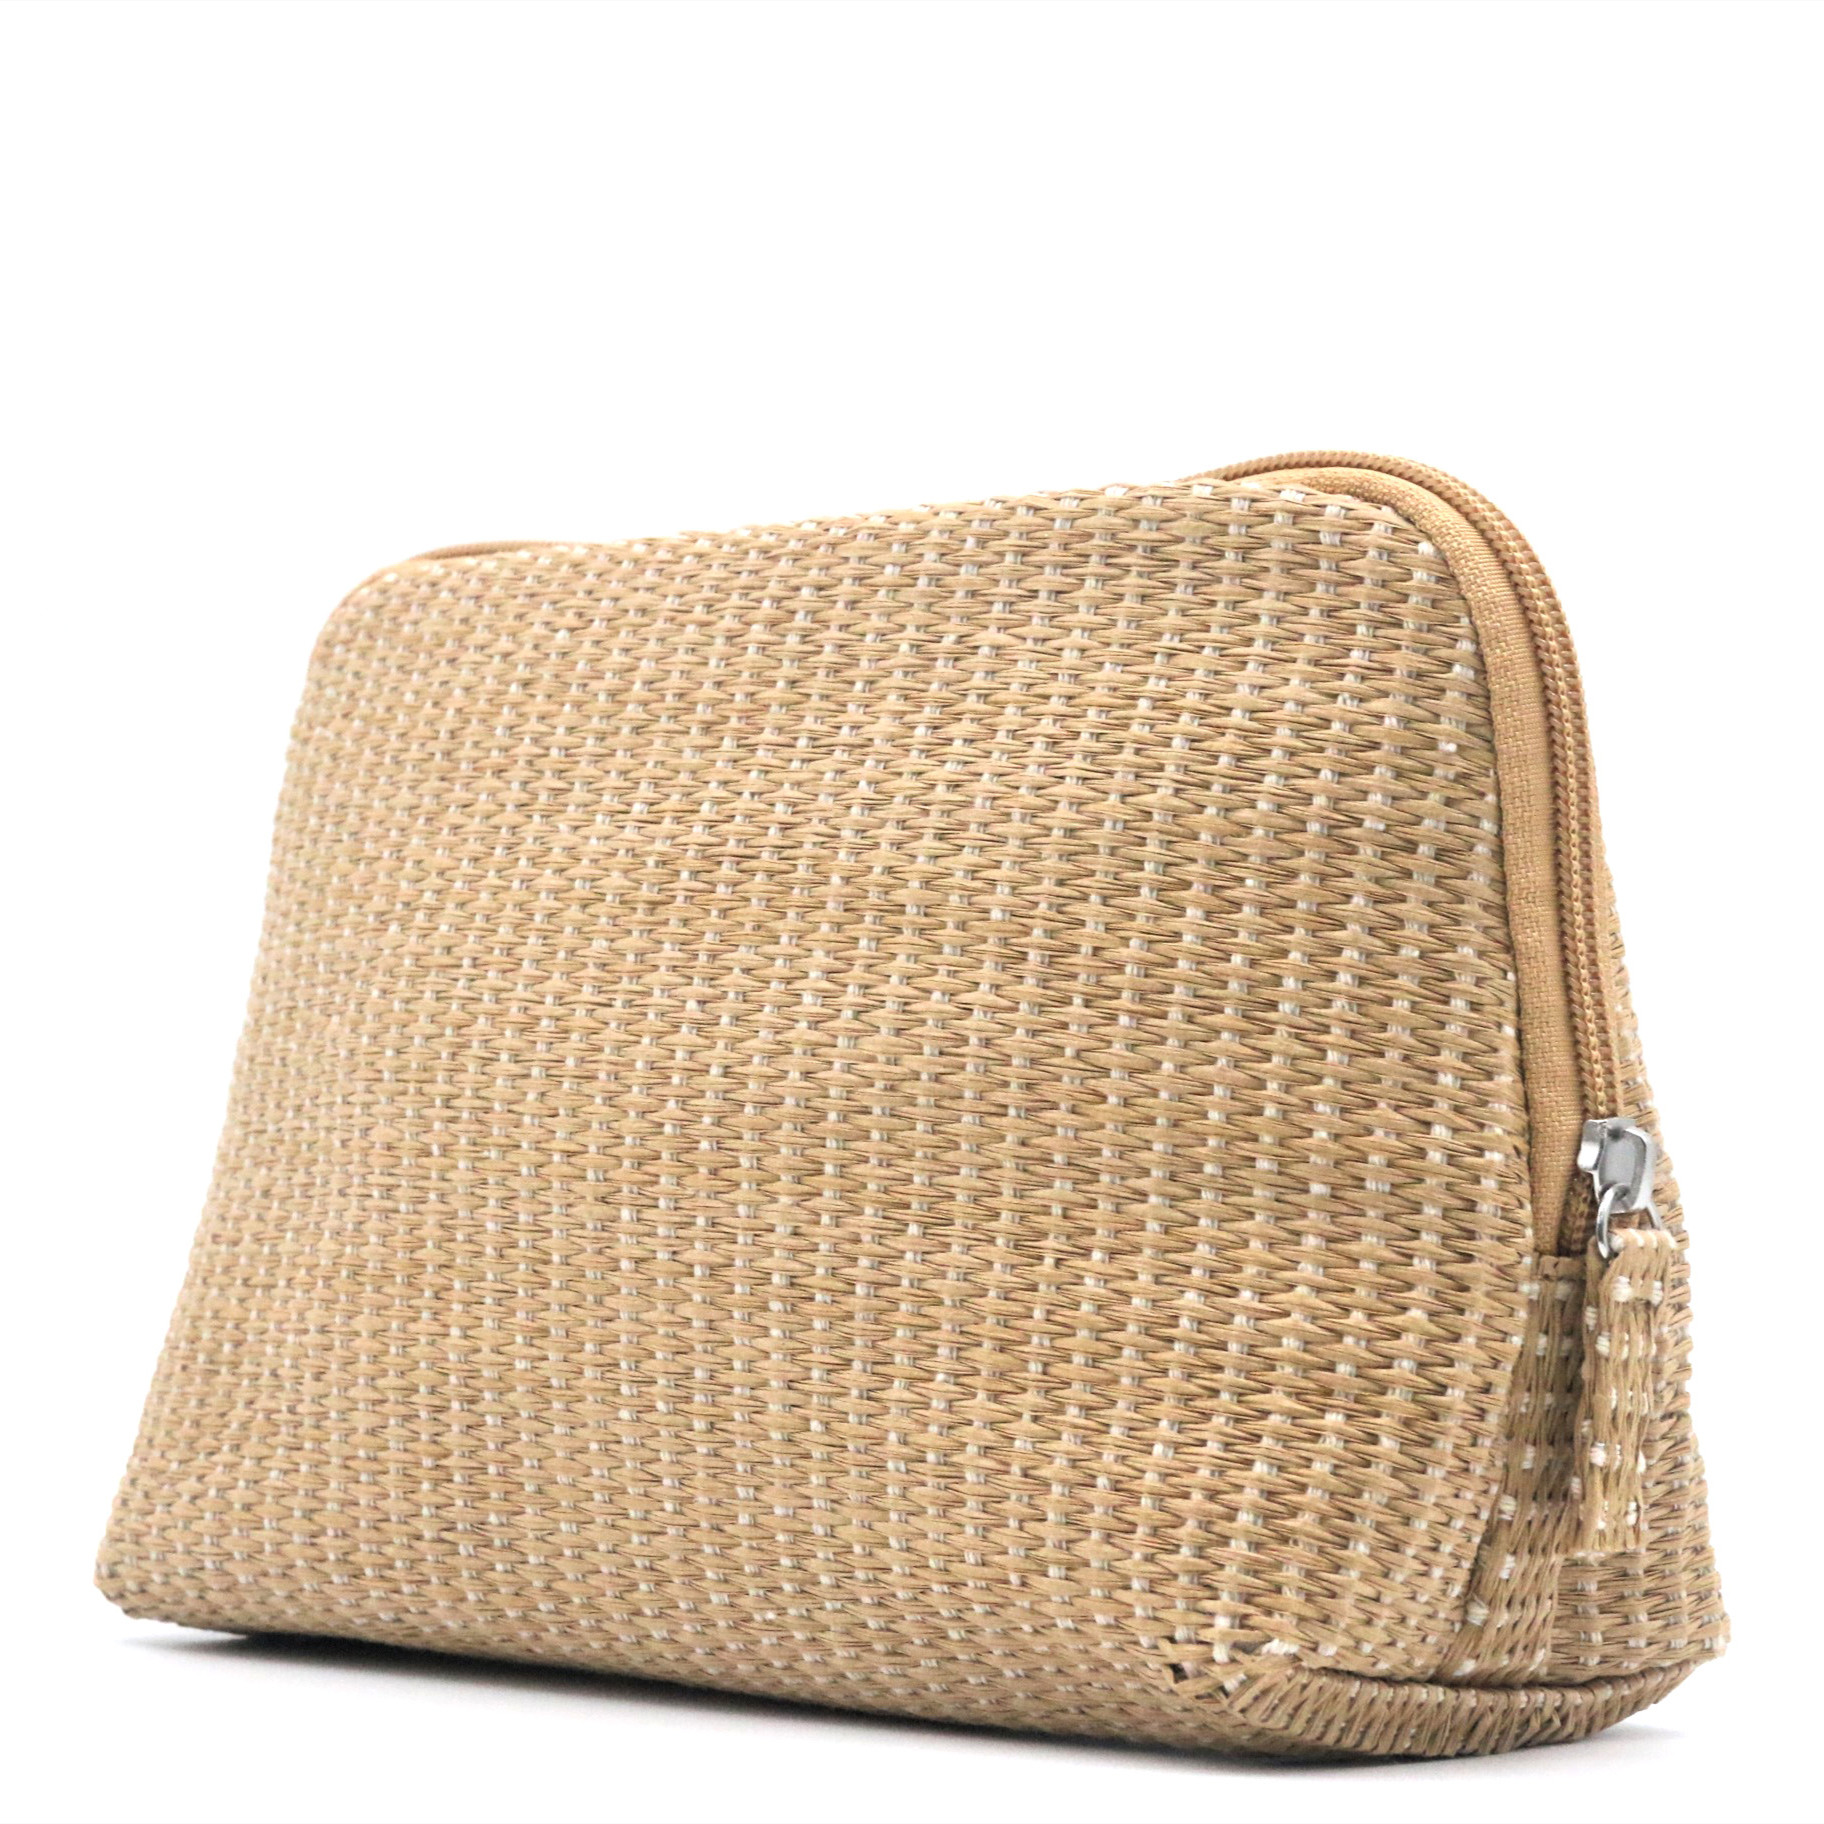 Hot Sale Eco-friendly Paper Straw Natural Beauty Cosmetic Bag Popular Shell Shape Woven Straw Paper Makeup Zipper Pouch Bag